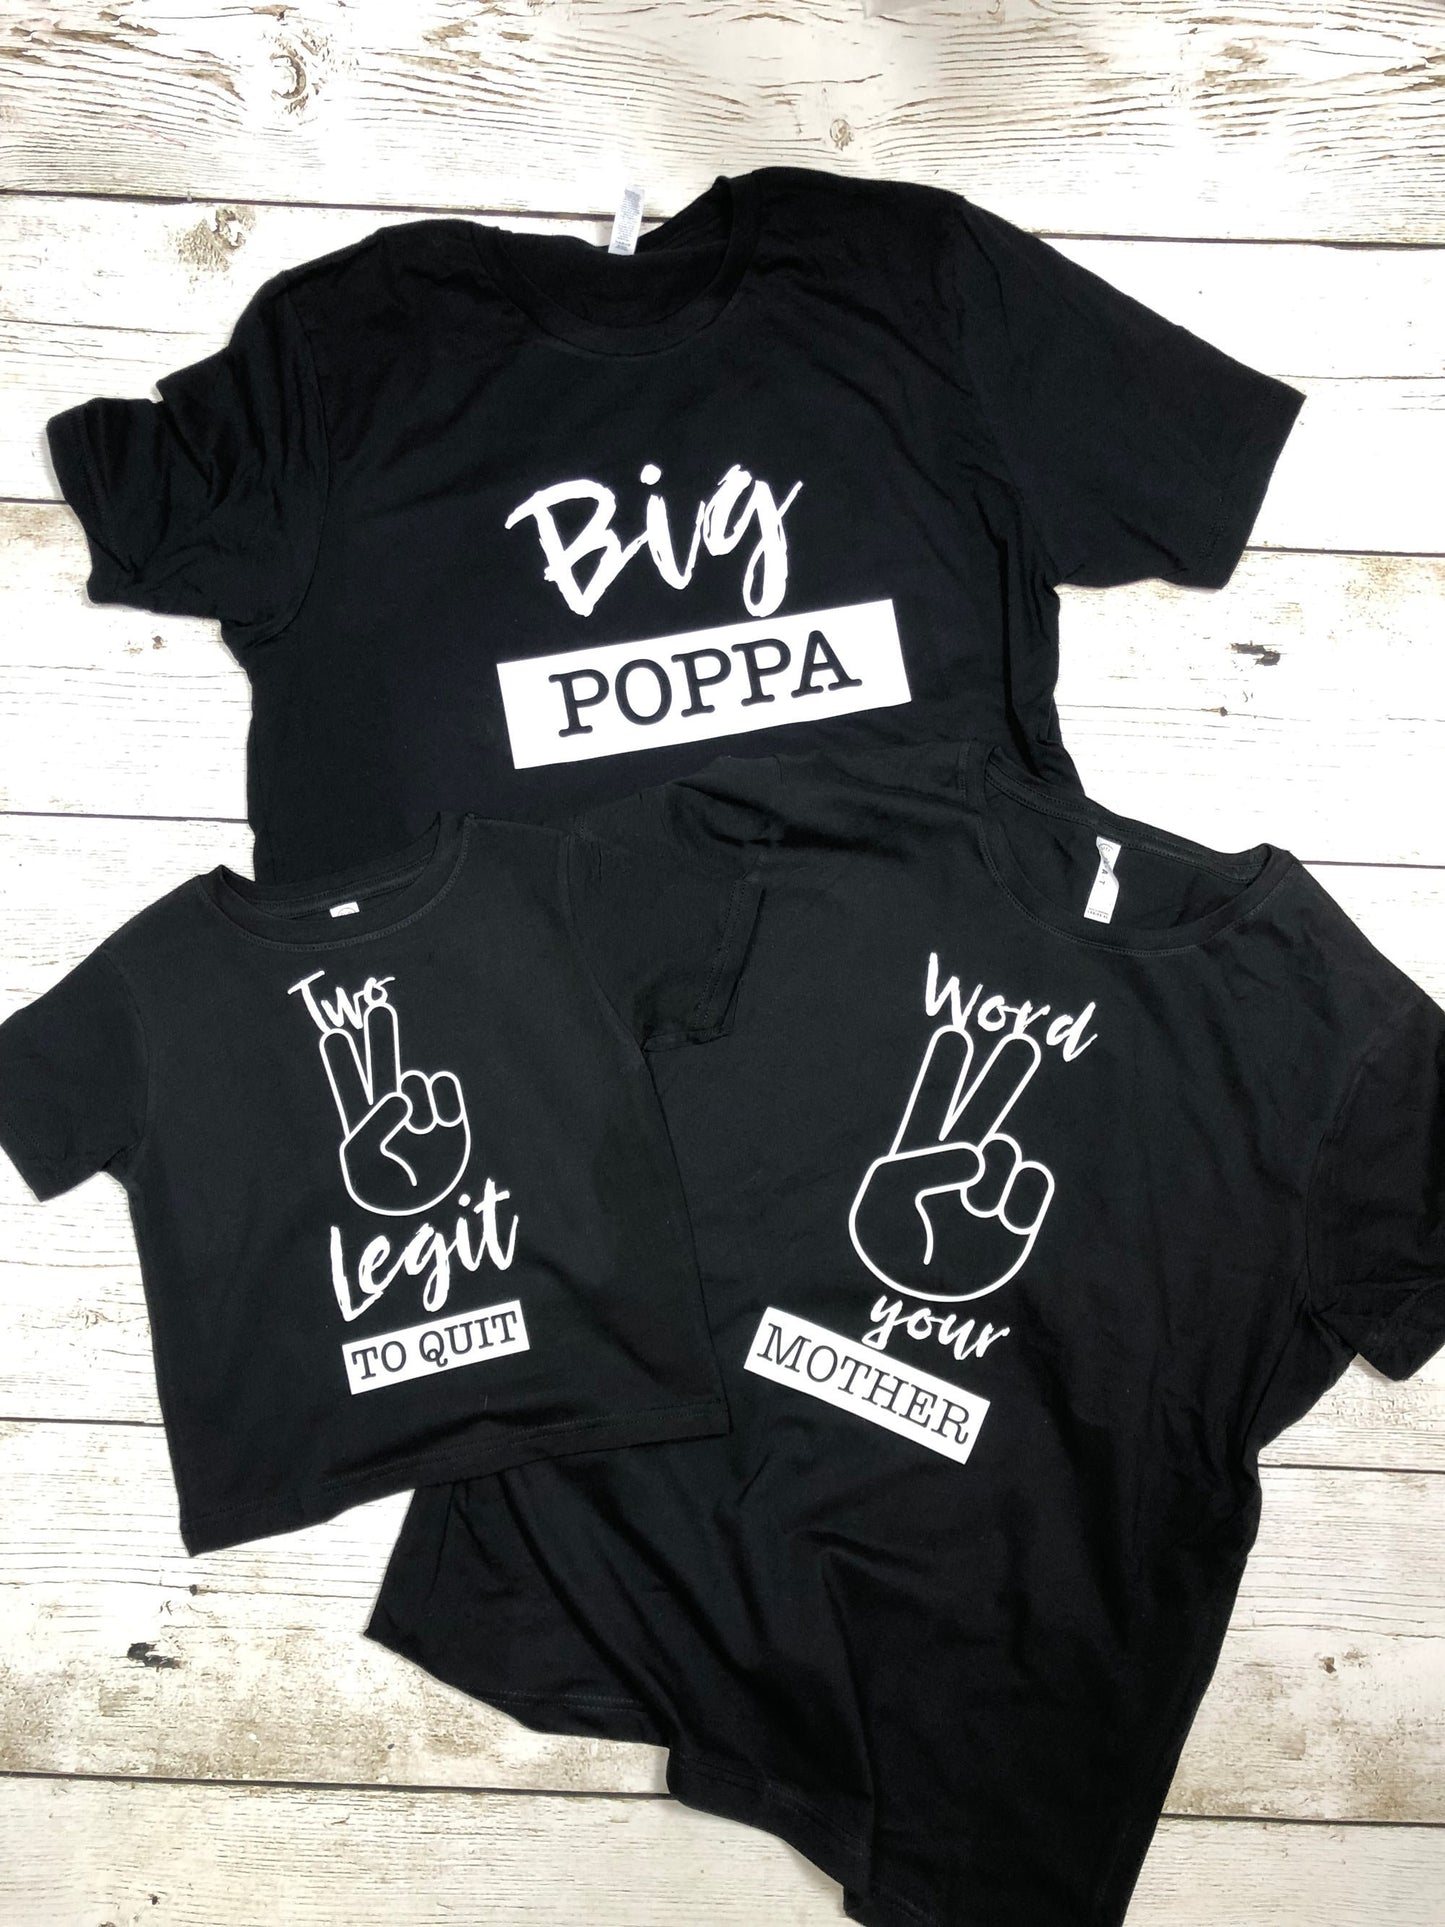 The Notorious One | Hip Hop Birthday Theme Family Tees